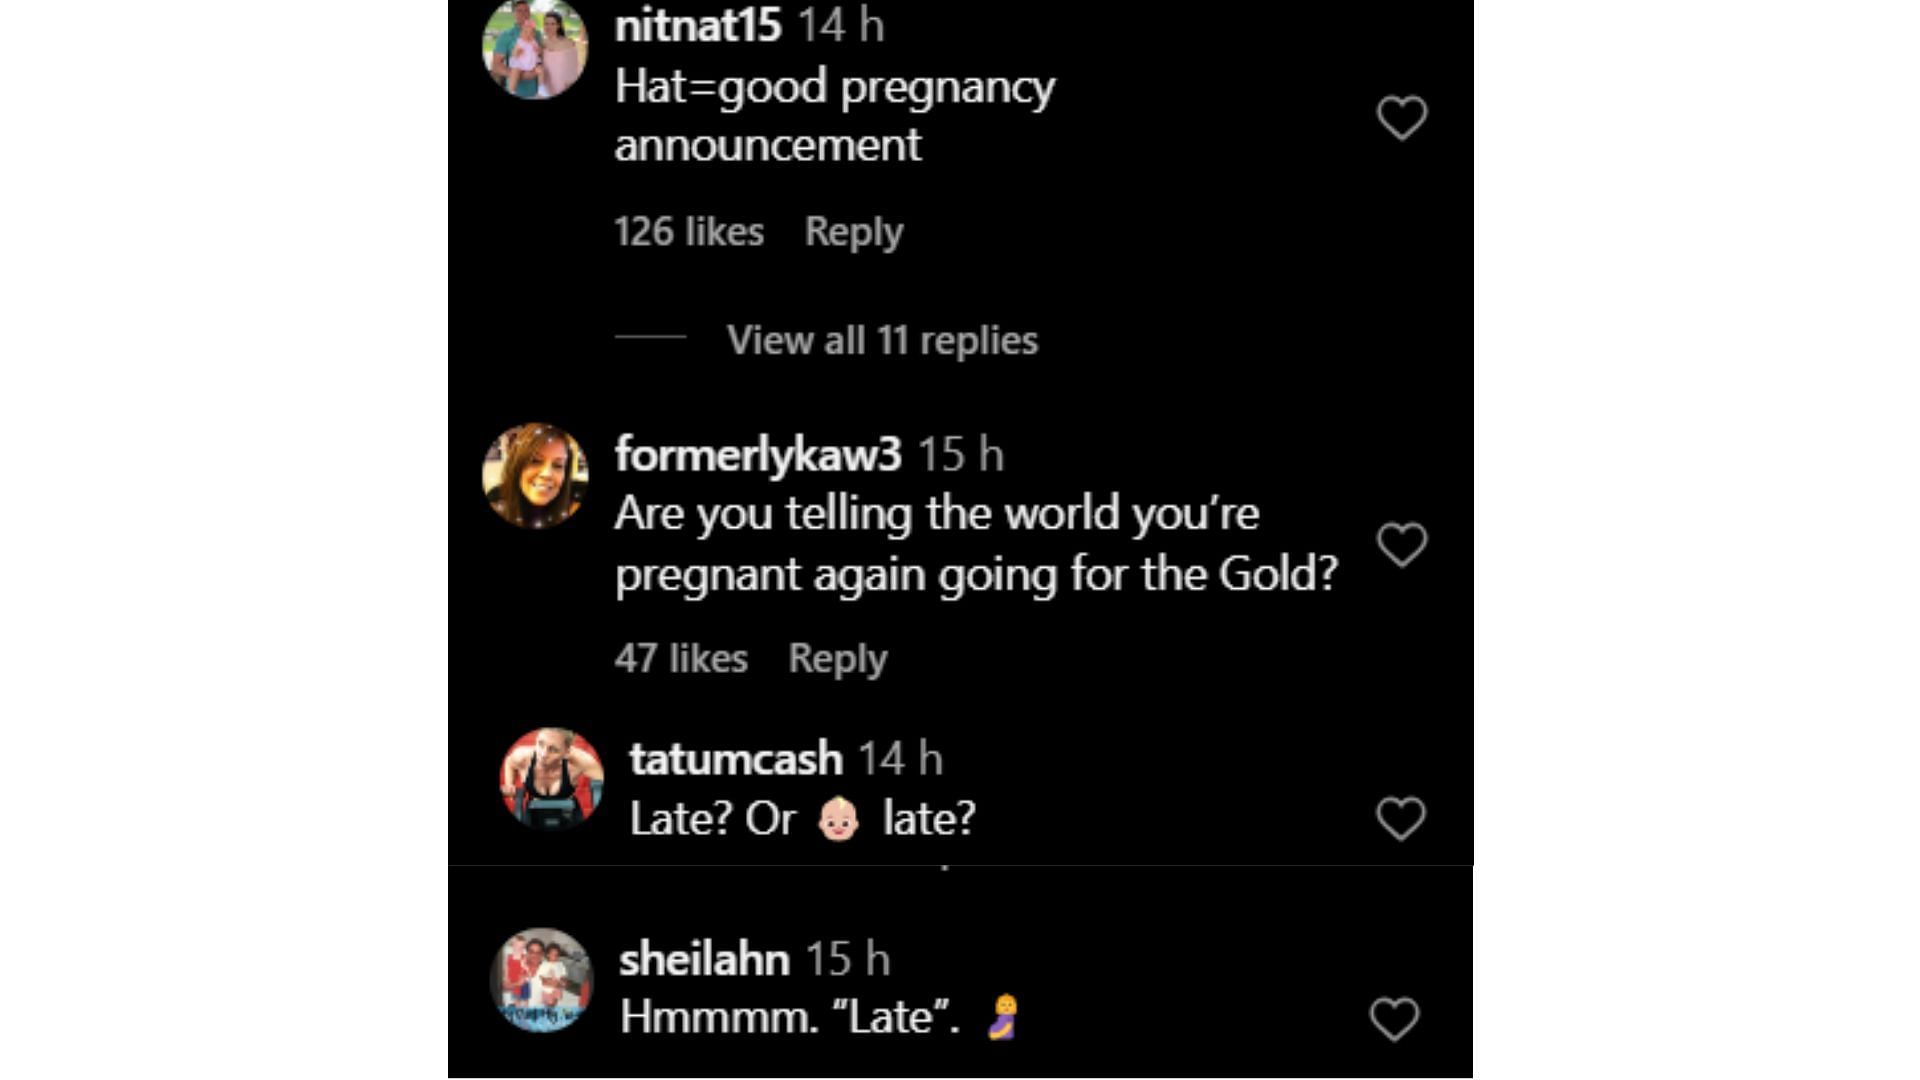 Fans speculate if Brittany is pregnant again (Image Credit: Brittany Mahomes&#039; post&#039;s comment section).